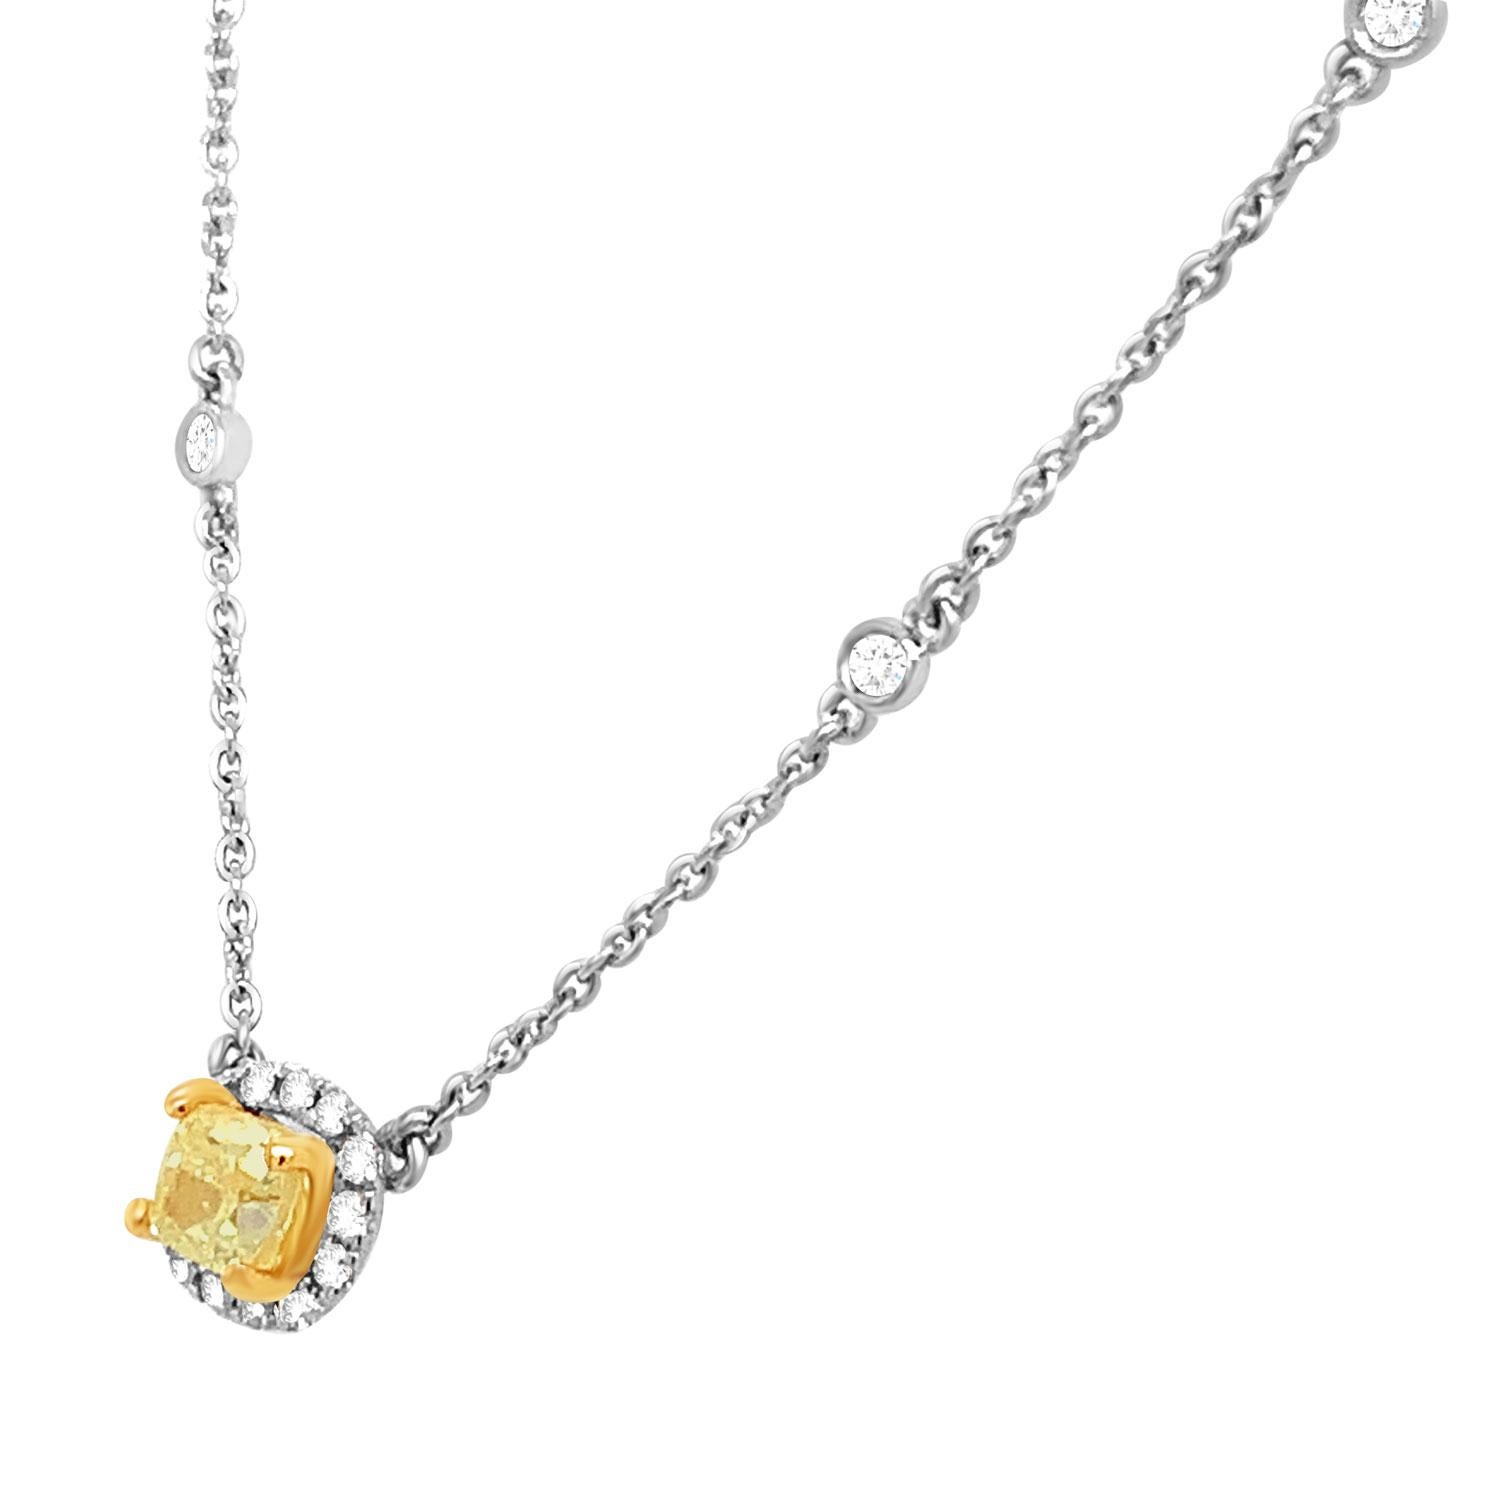 This stunning 18k White gold and Yellow gold necklace feature a 0.31 Carat Yellow Elongated cushion-shaped diamond encircled by one row of brilliant round diamonds on a 1 mm station chain containing sixteen (16) round brilliant diamonds bezel